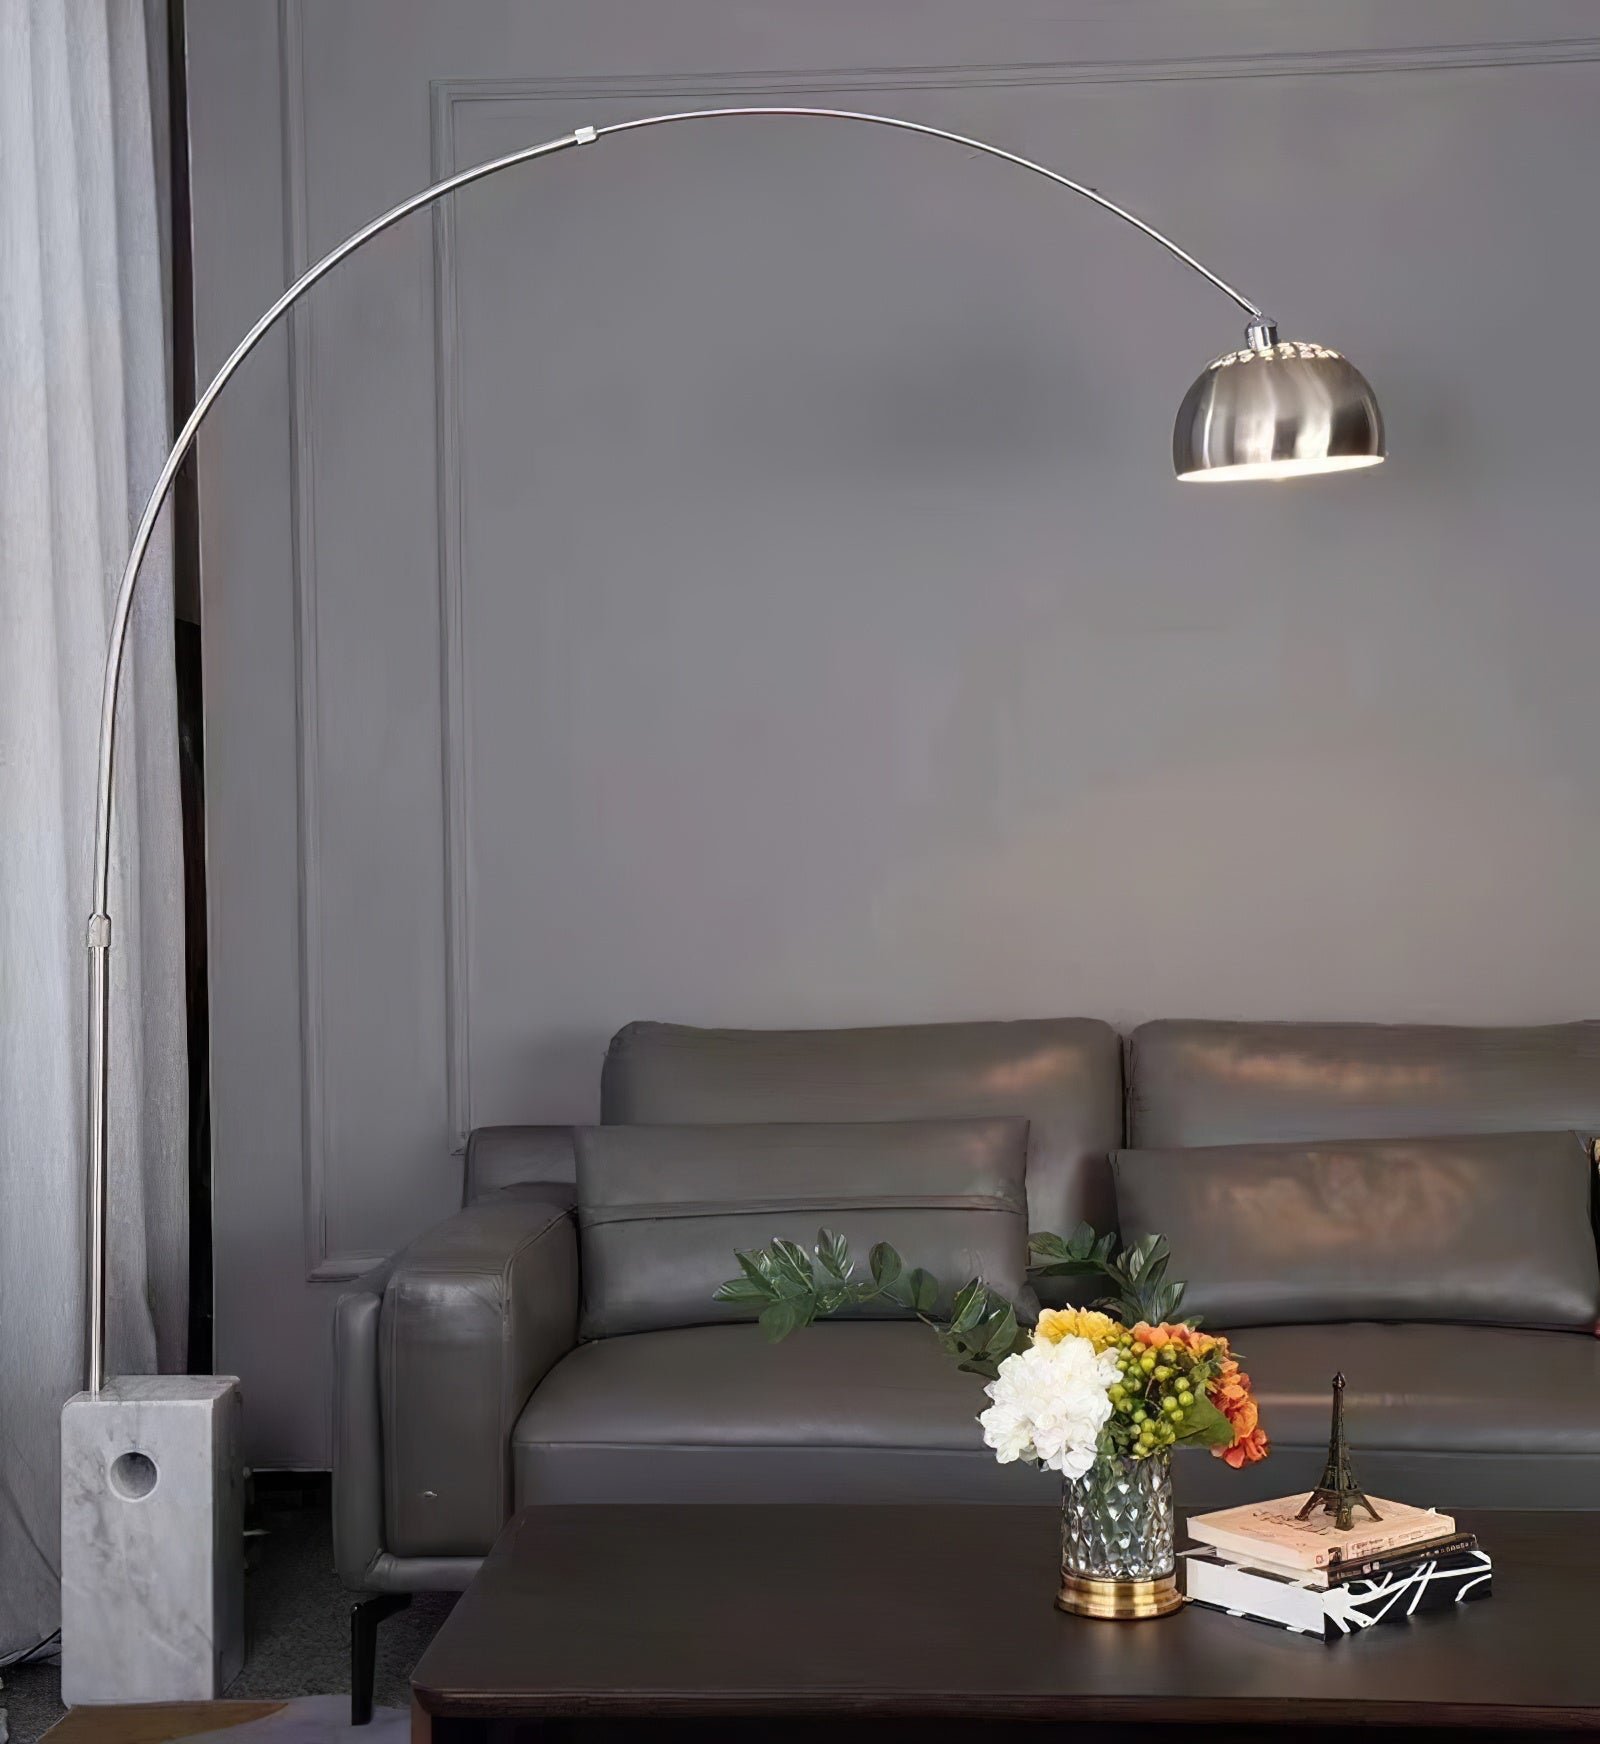 Arco Floor Lamp with UK Plug in Round Pipe Design, Dimensions: W 66.9″ x H 74.8″ (or W 170cm x H 190cm)